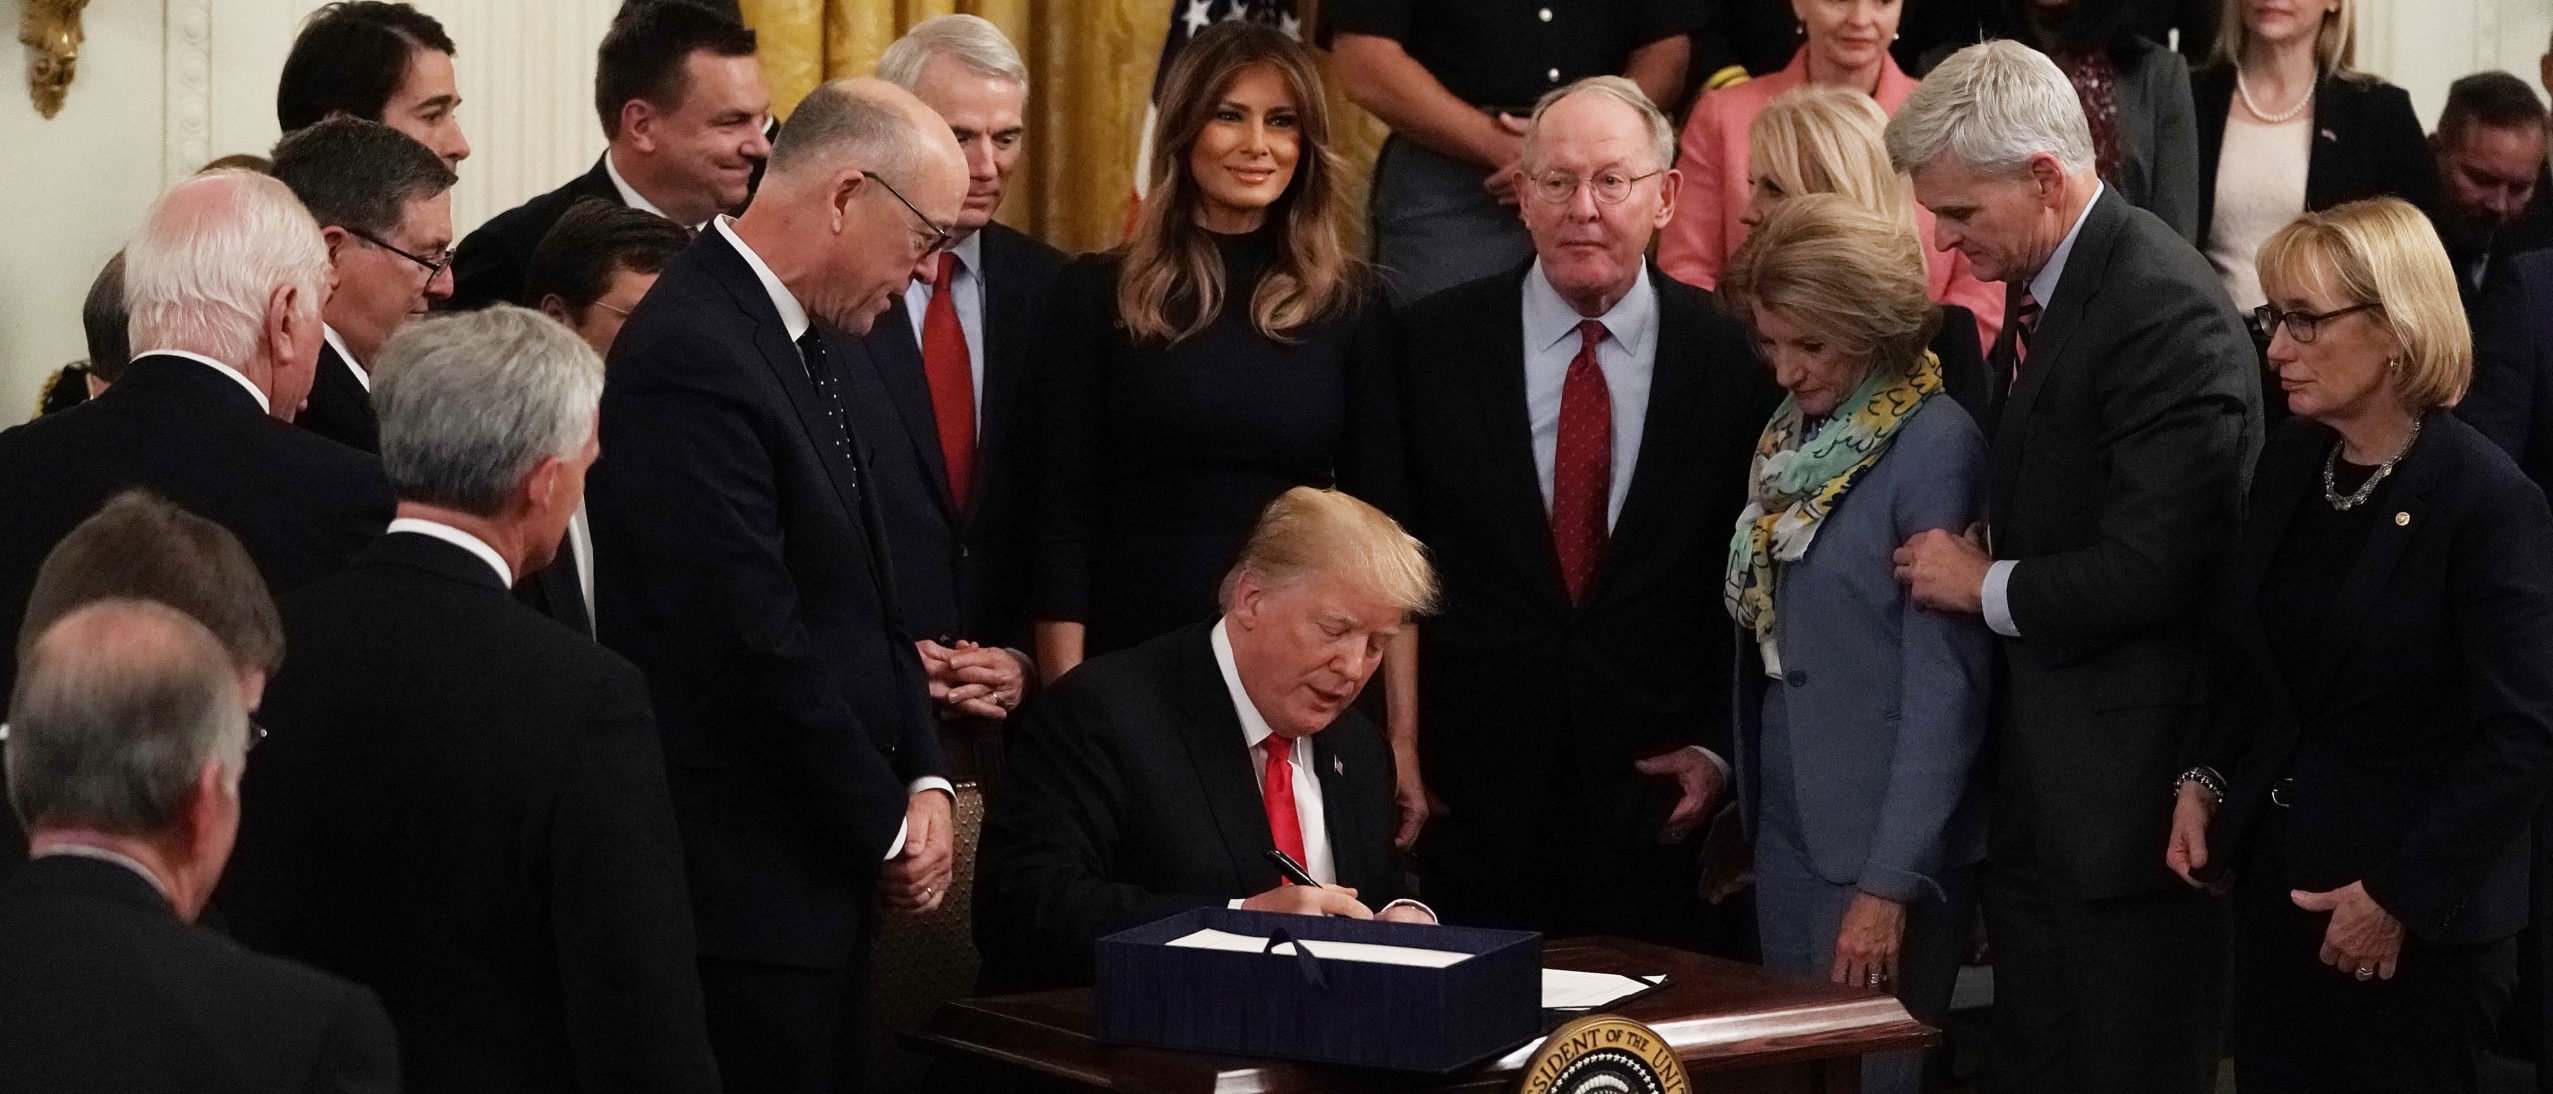 WASHINGTON, DC - OCTOBER 24: Flanked by lawmakers and first lady Melania Trump, U.S. President Donald Trump participates in a bill signing to dedicate more resources to fight the opioid crisis during an East Room event at the White House October 24, 2018 in Washington, DC.(Photo by Alex Wong/Getty Images)